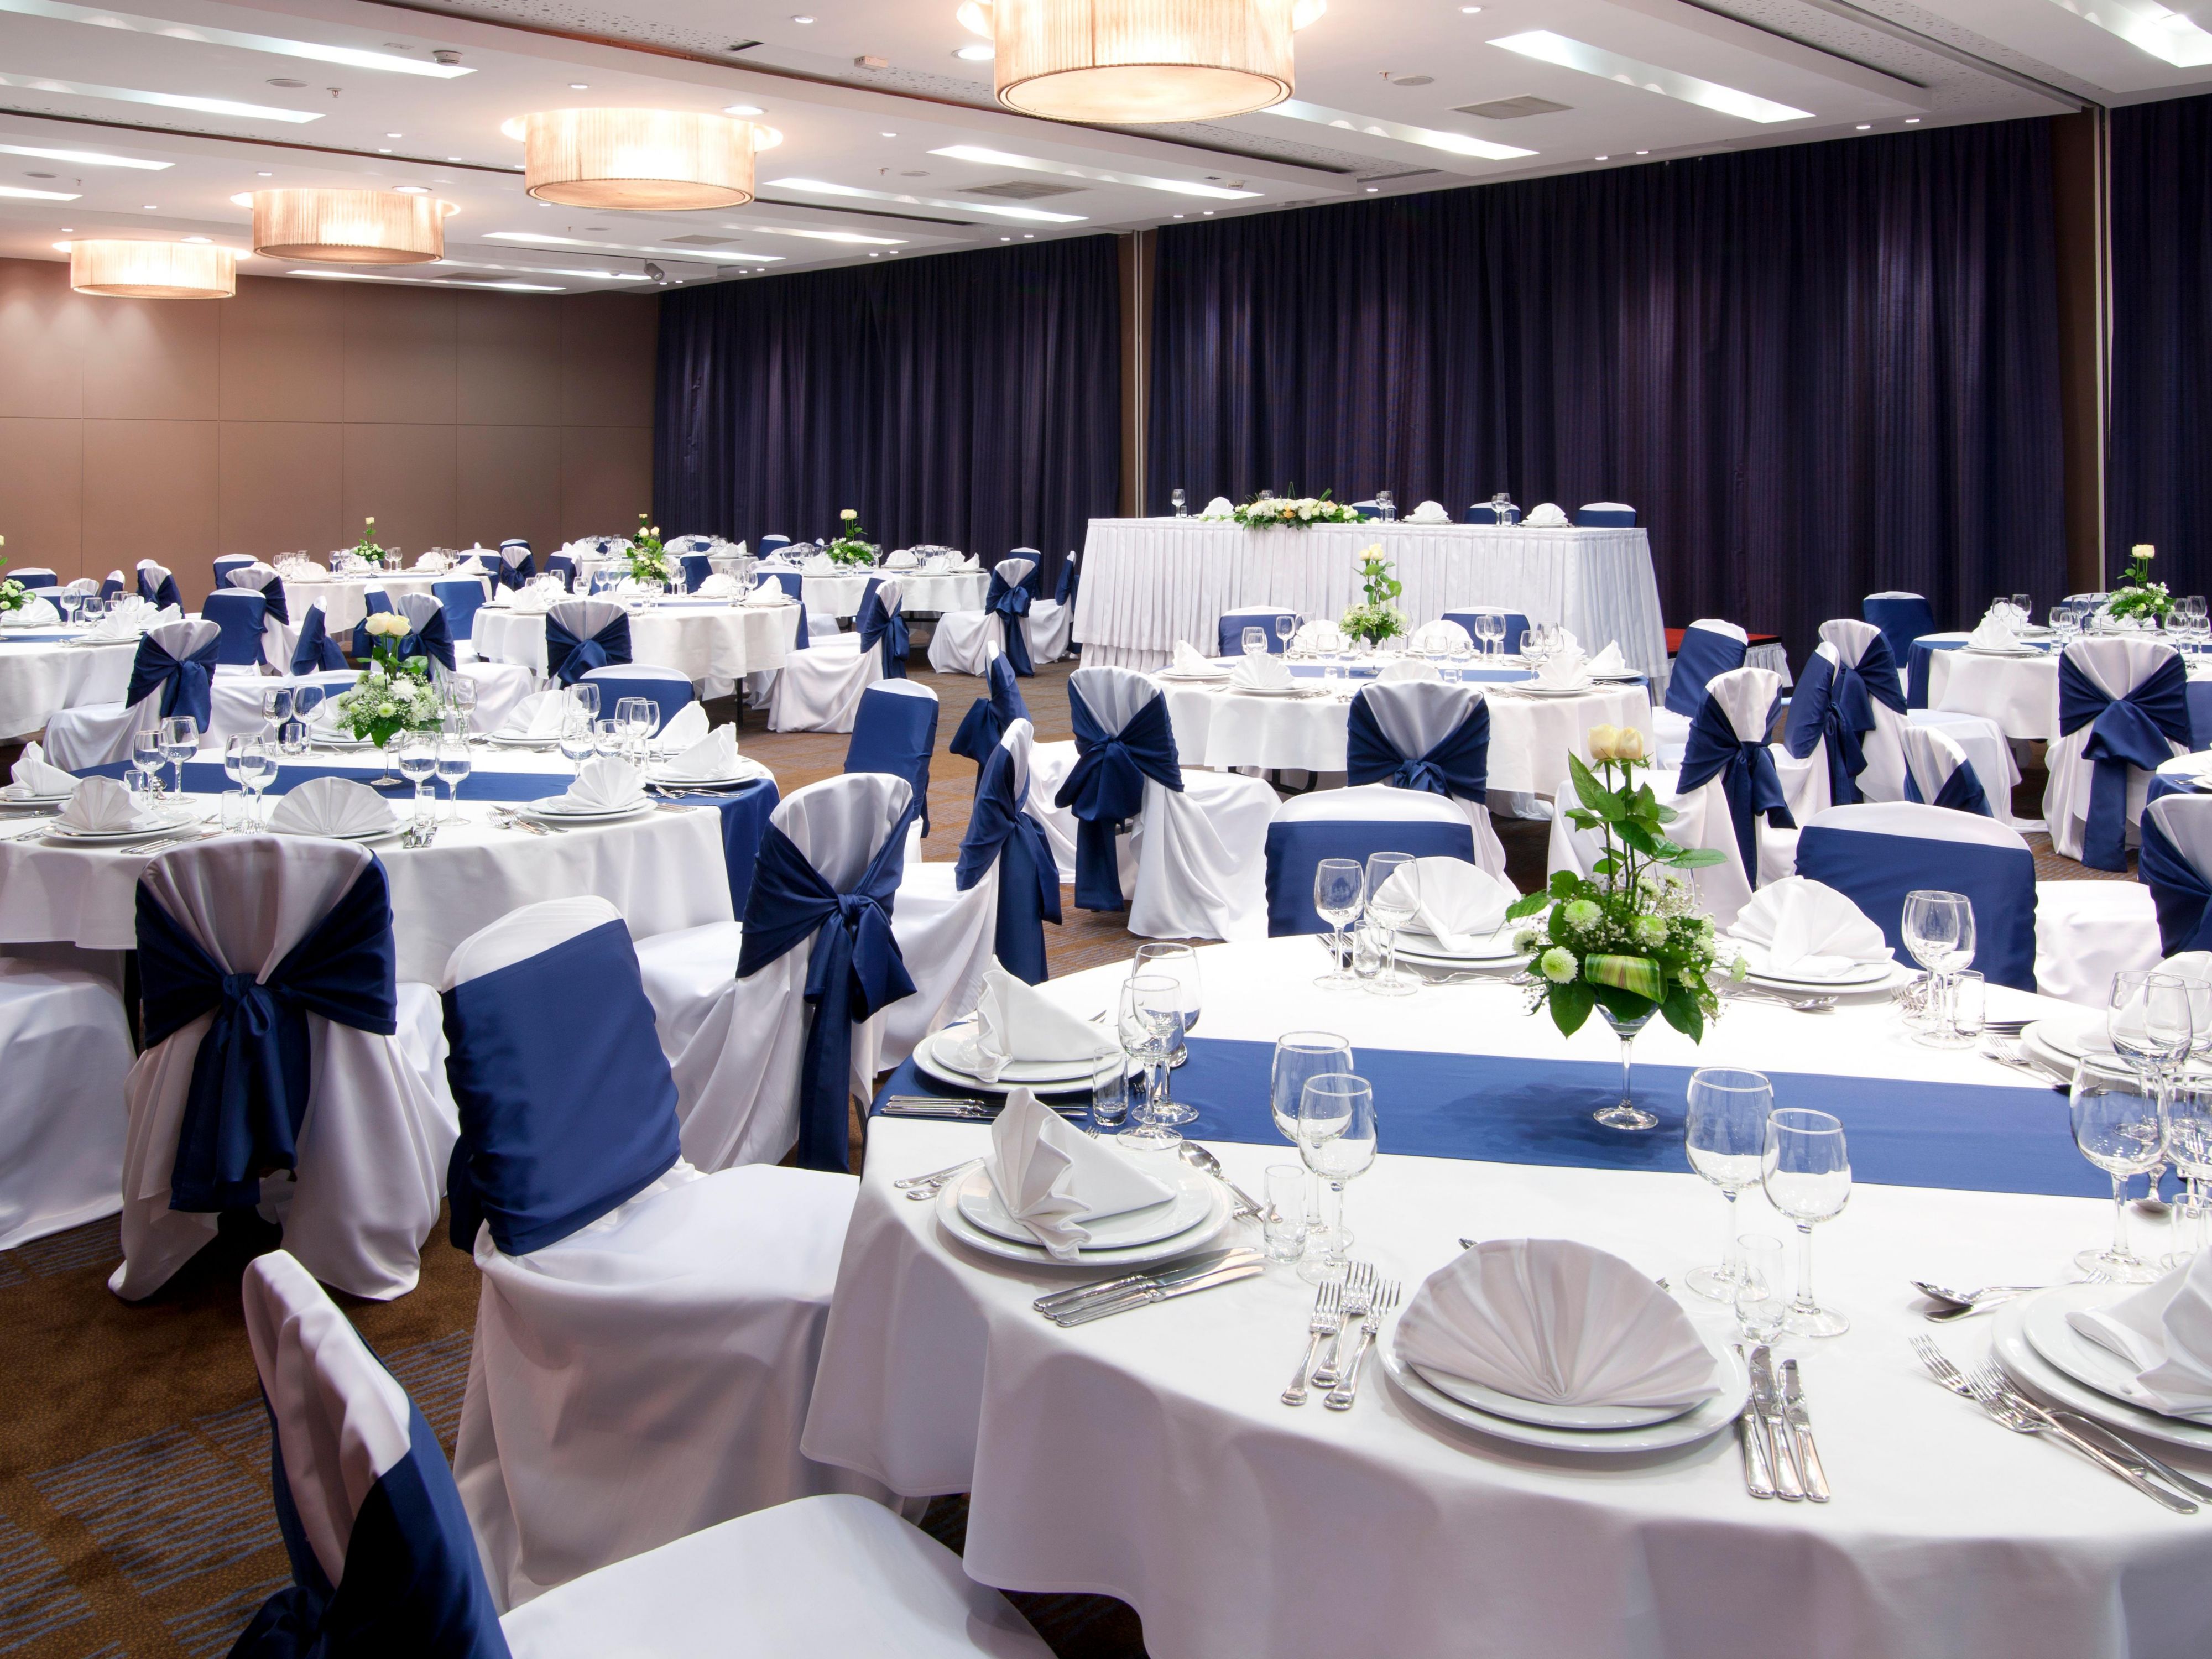 Business conference? A wedding? A grand reception? It doesn't matter! Any event in our hotel will be held at the highest level.